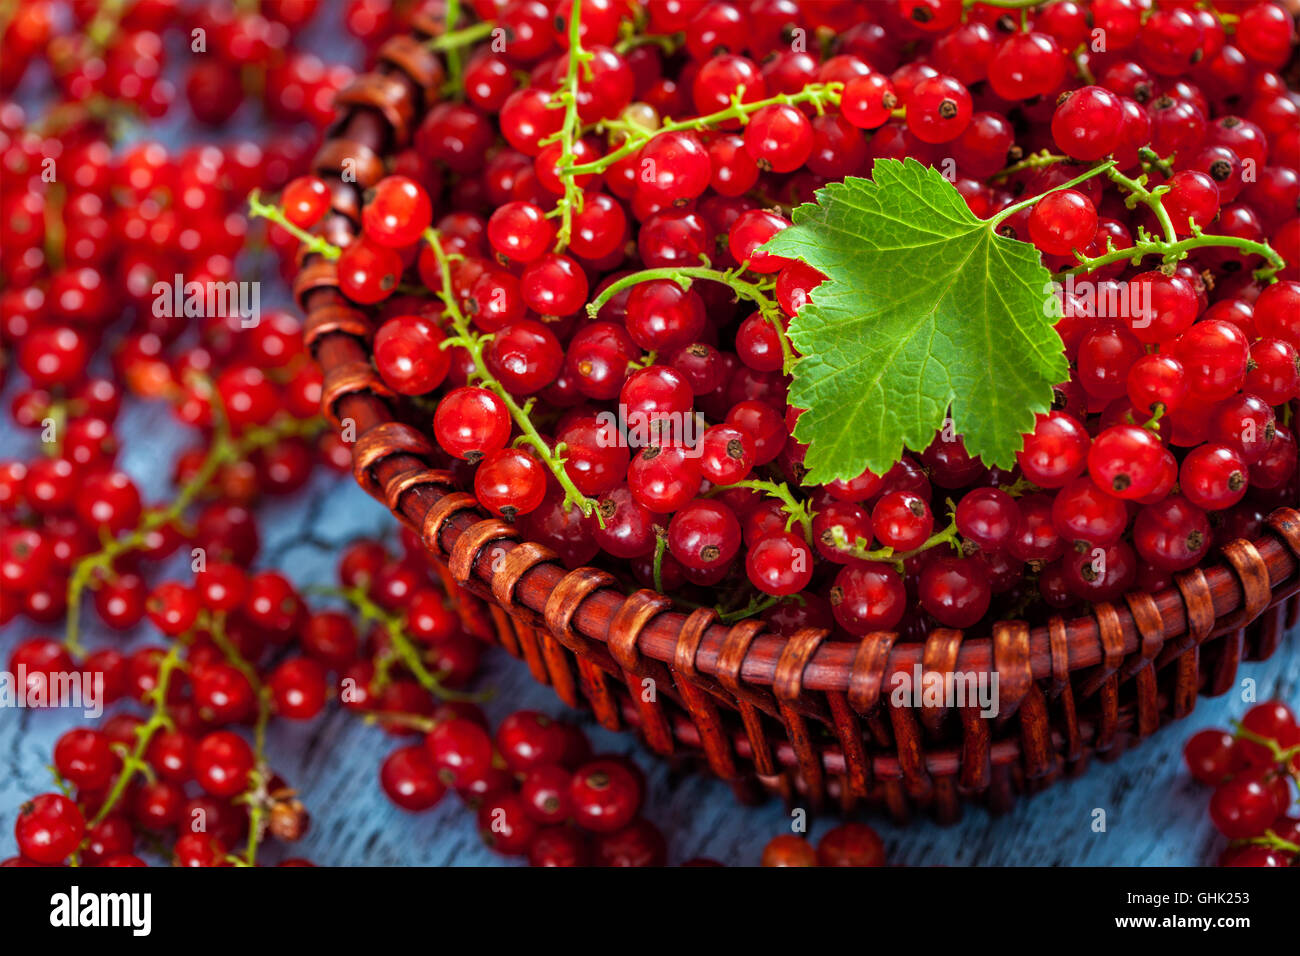 Redcurrant in wicker bowl on the table Stock Photo